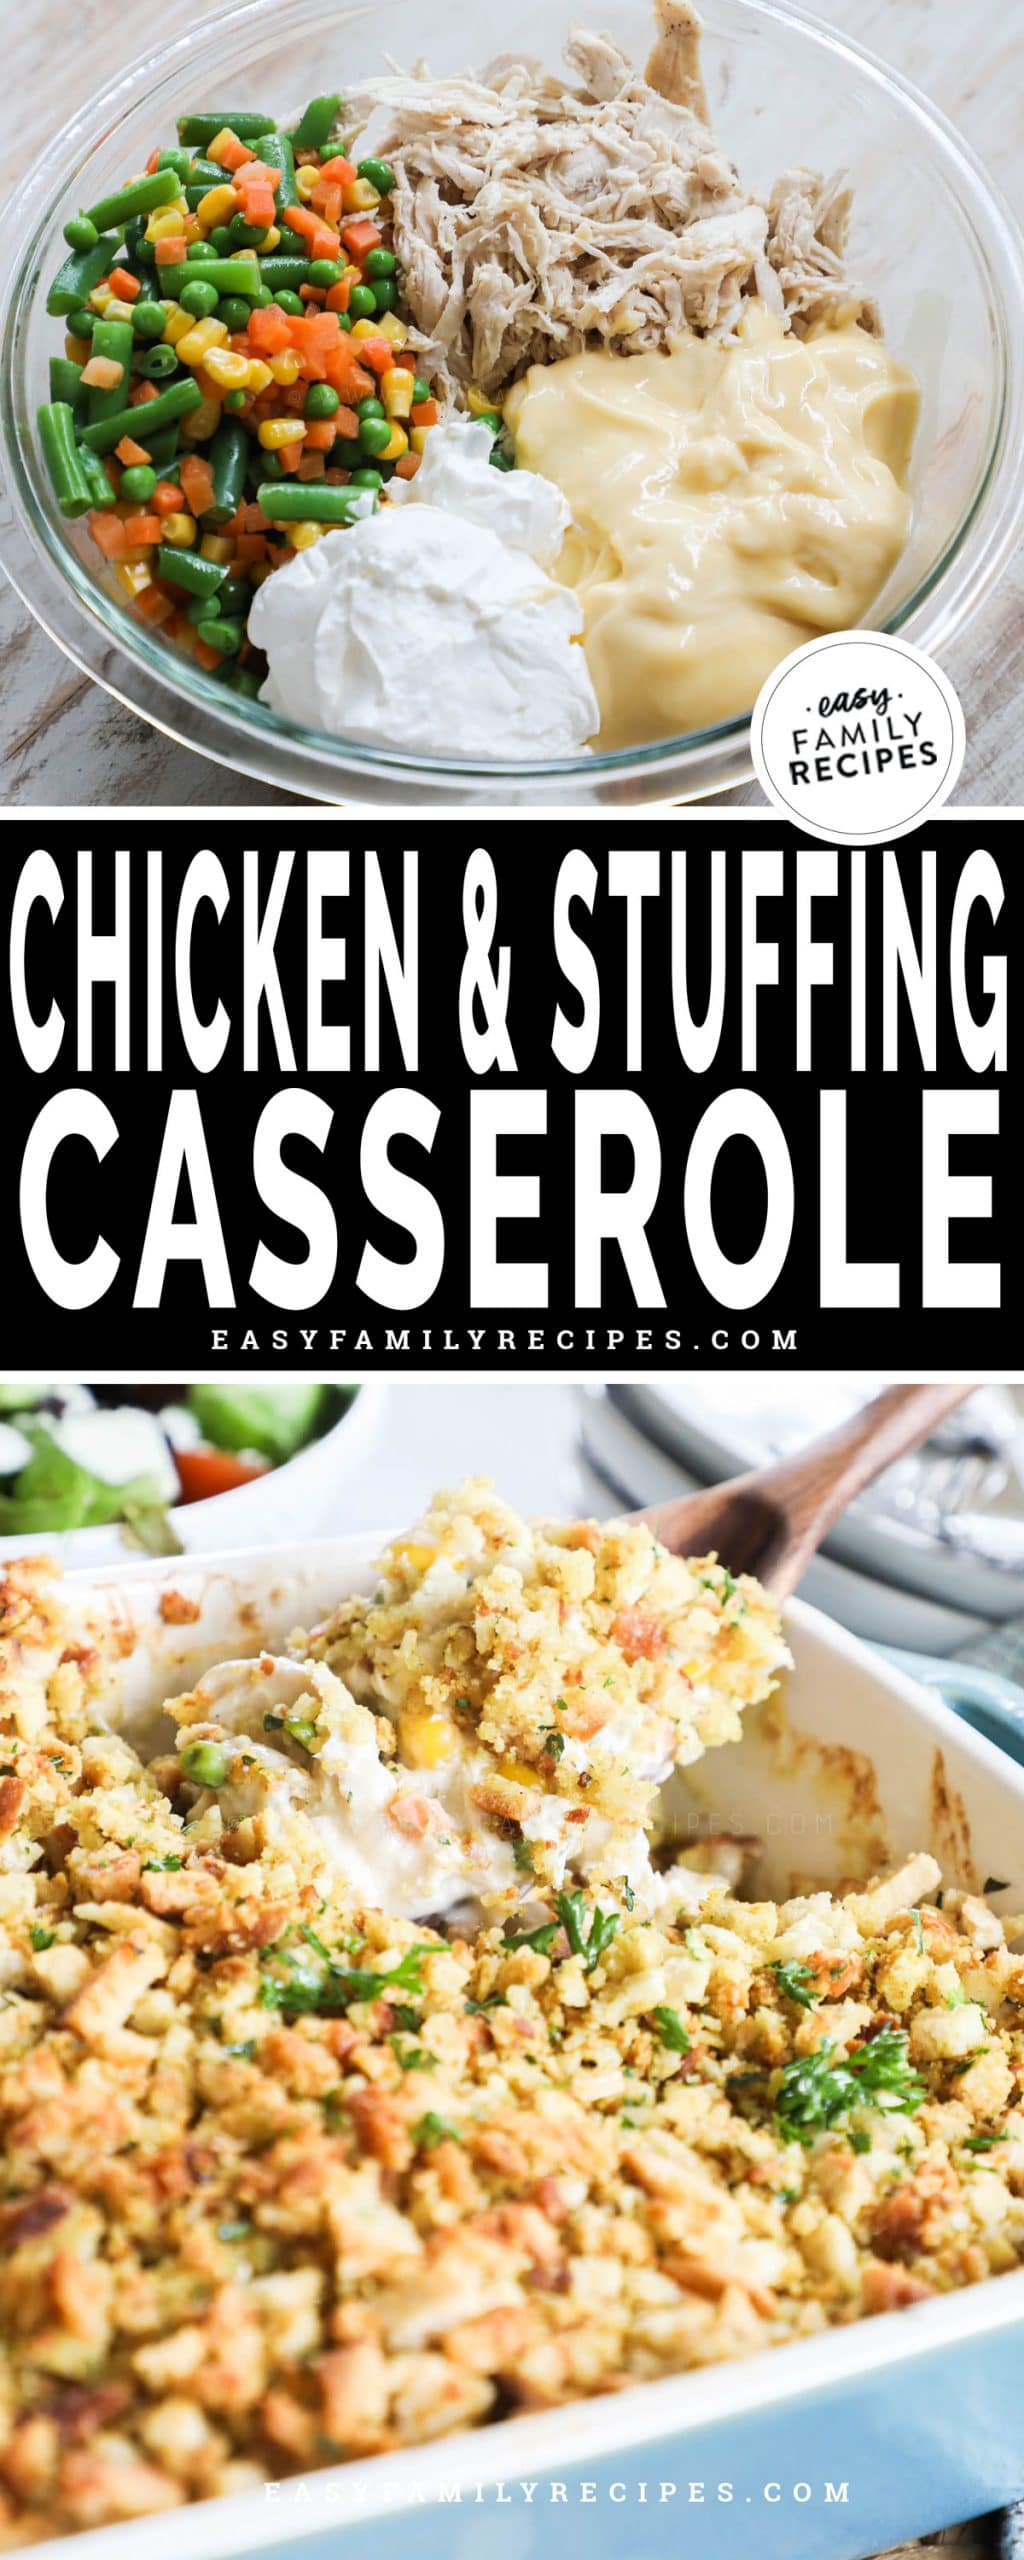 Easy Chicken Stuffing Casserole in bowl before being mixed - top. Creamy Chicken and Stuffing Casserole after baked - bottom